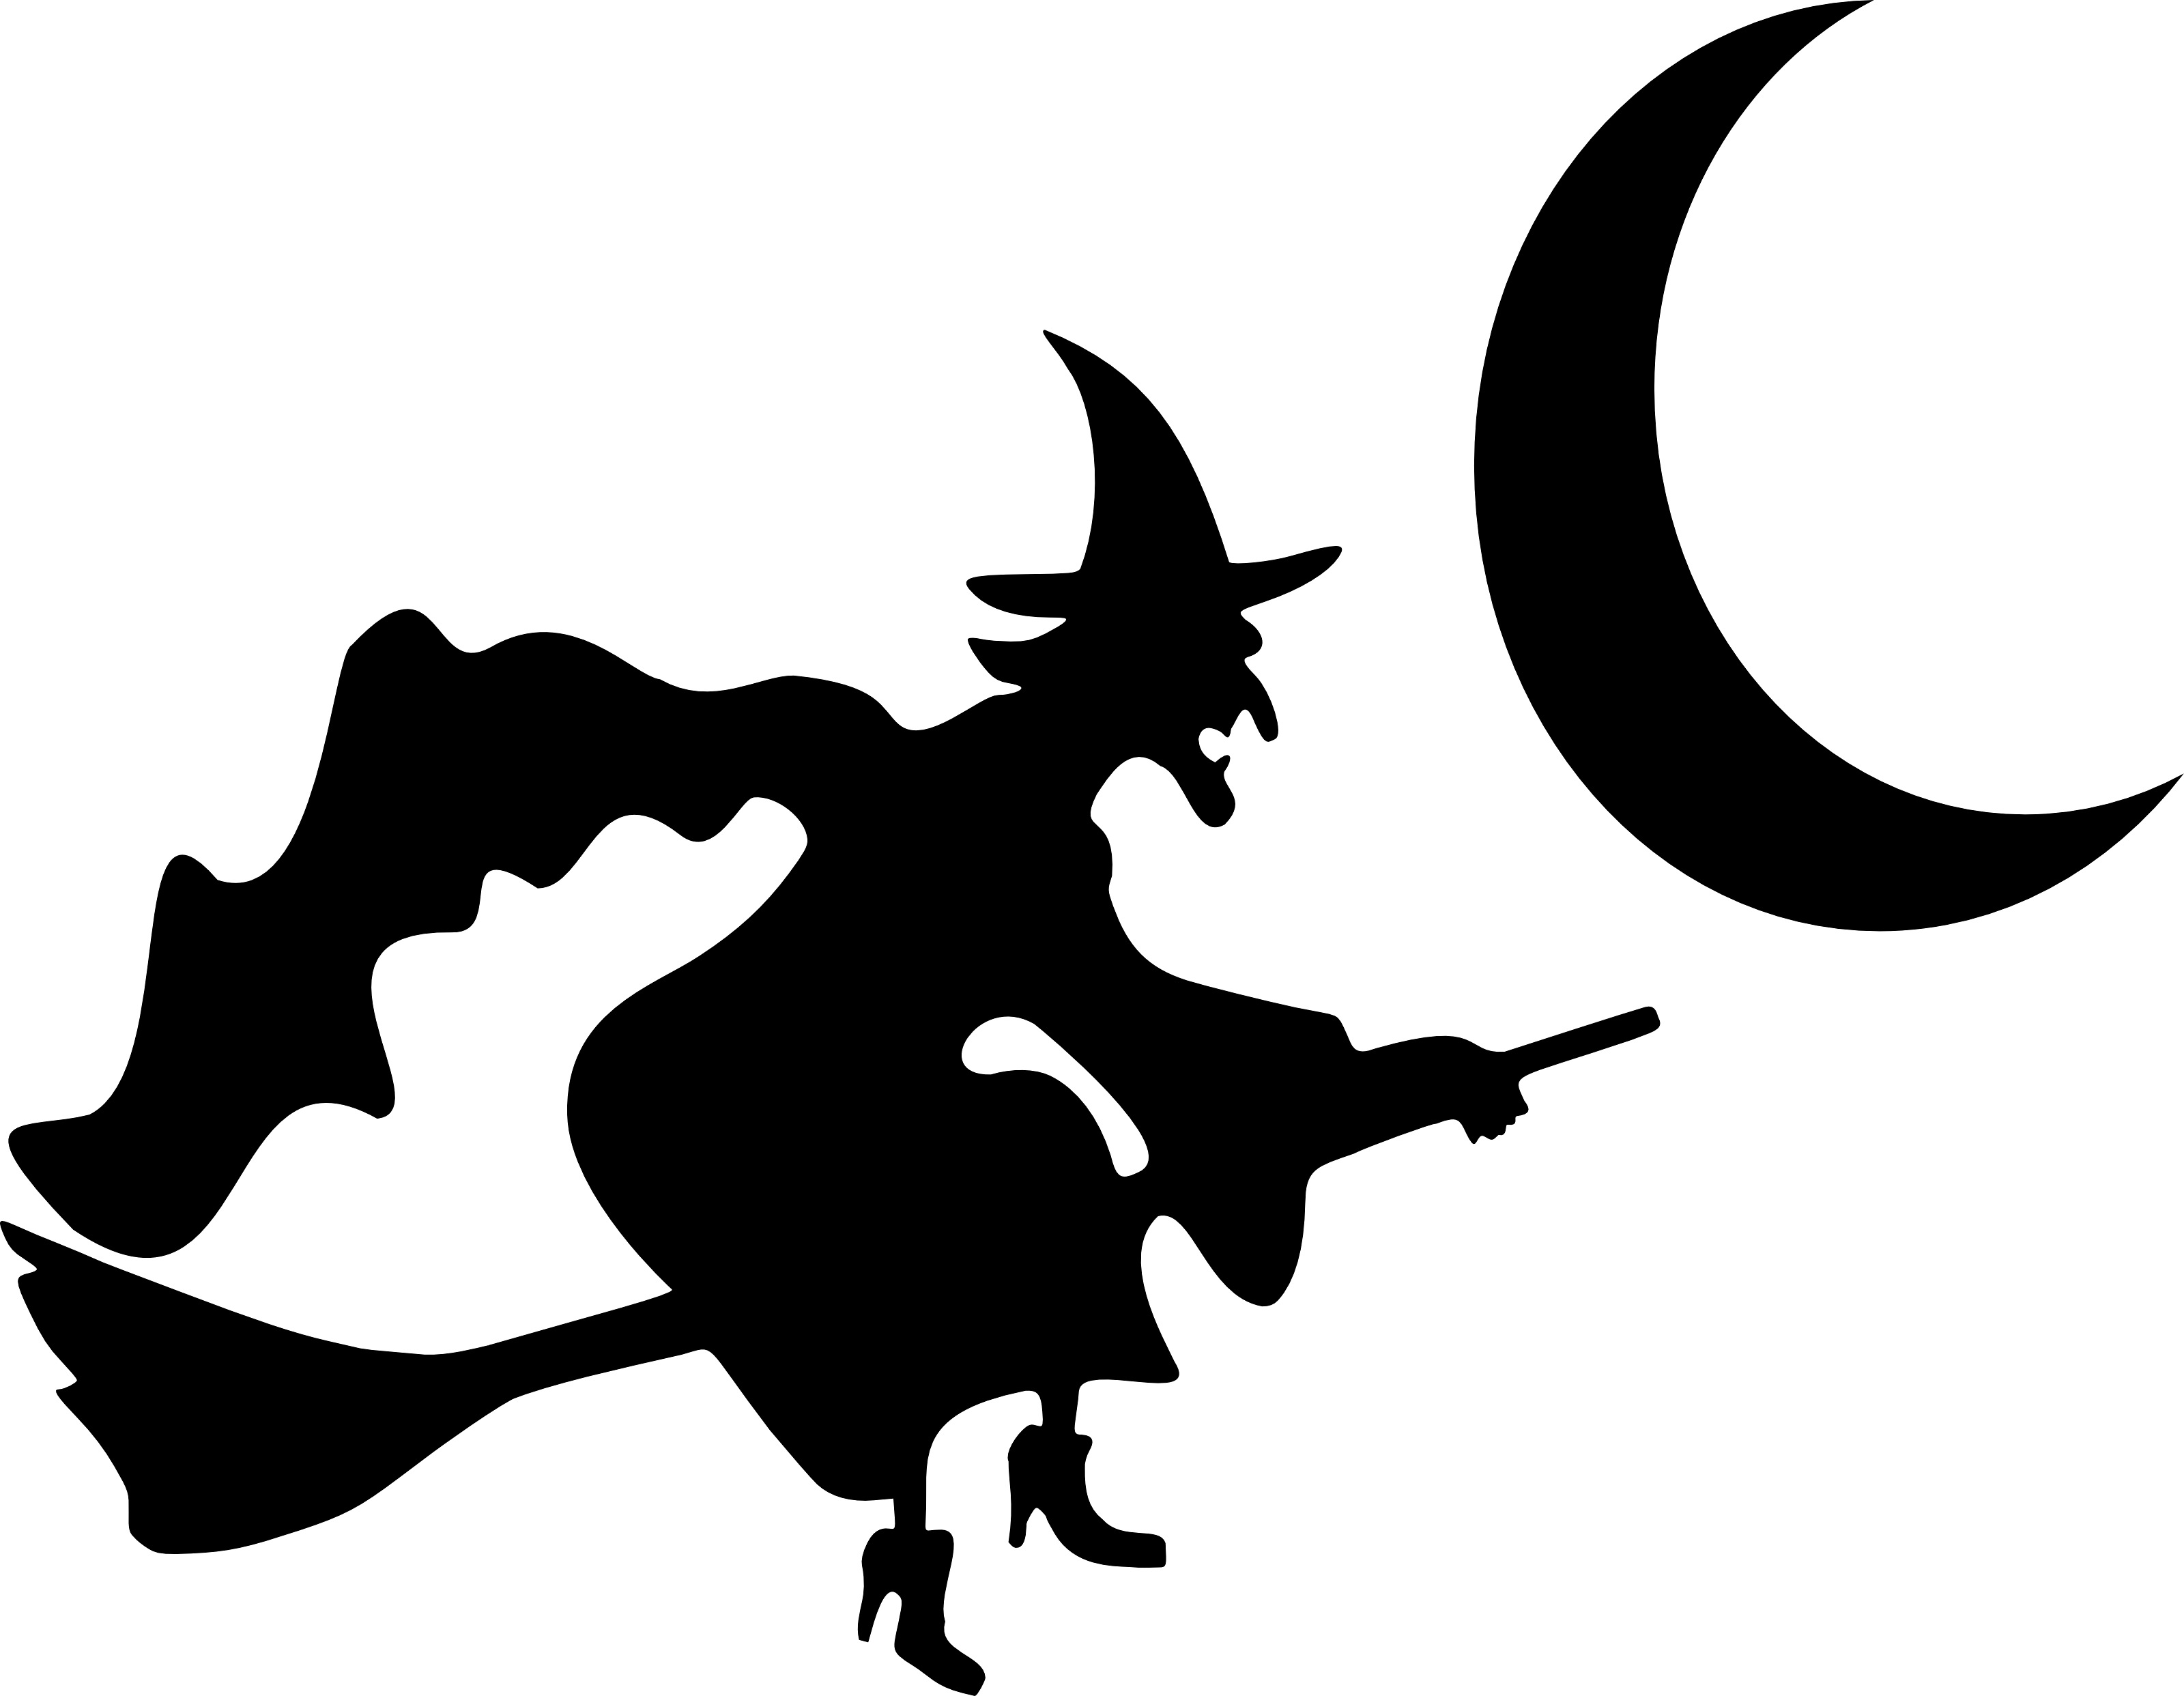 Furniture : Stunning Witch Flying Crescent Moon Silhouette ...